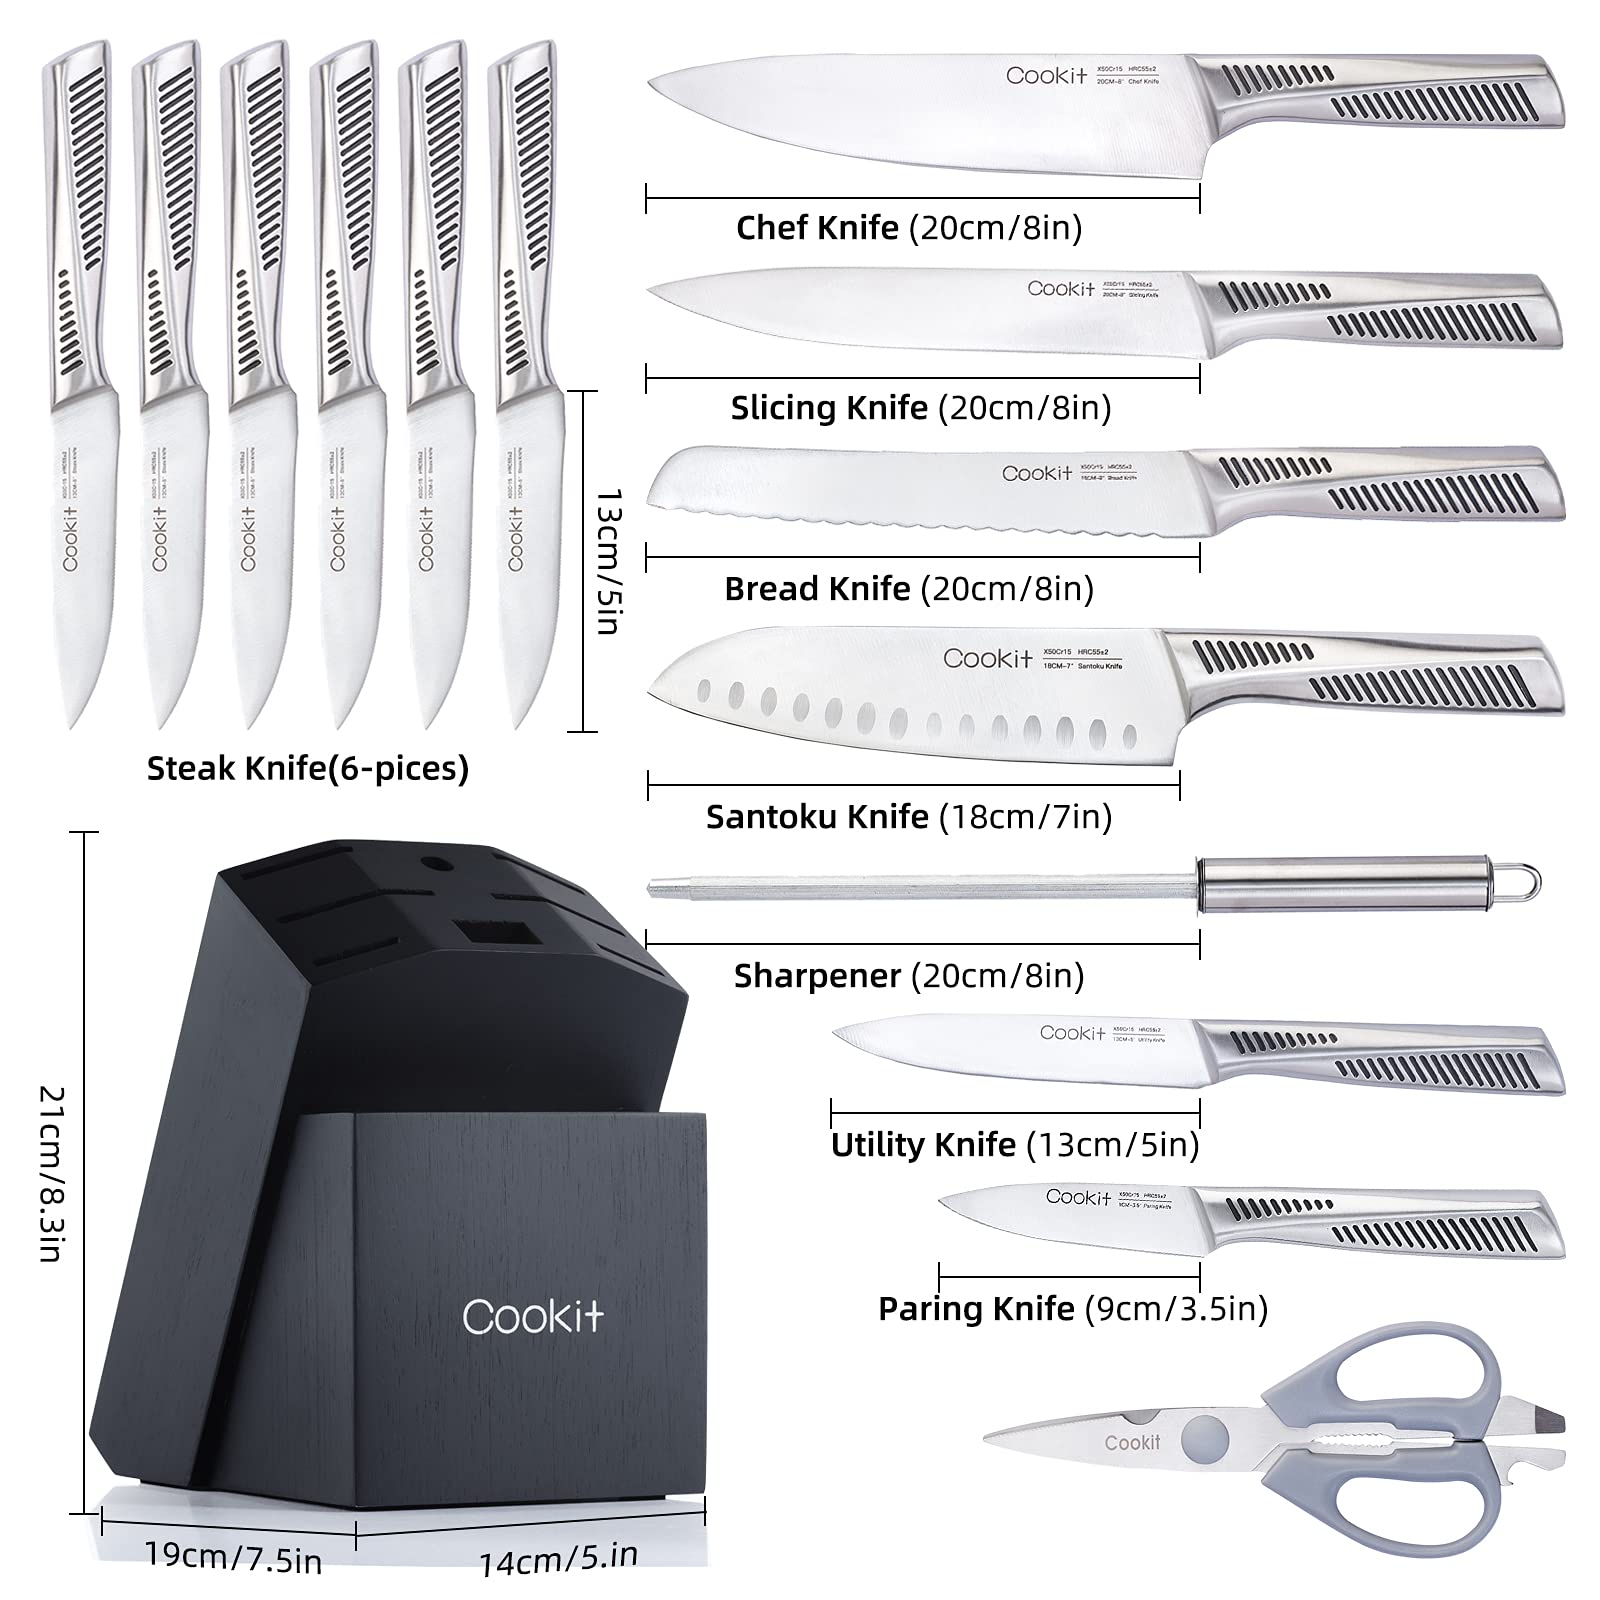 Premium 15-Piece Kitchen Knife Set, complete with a sleek storage block and essential accessories. Elevate your culinary experience with this top-rated kitchen knife collection